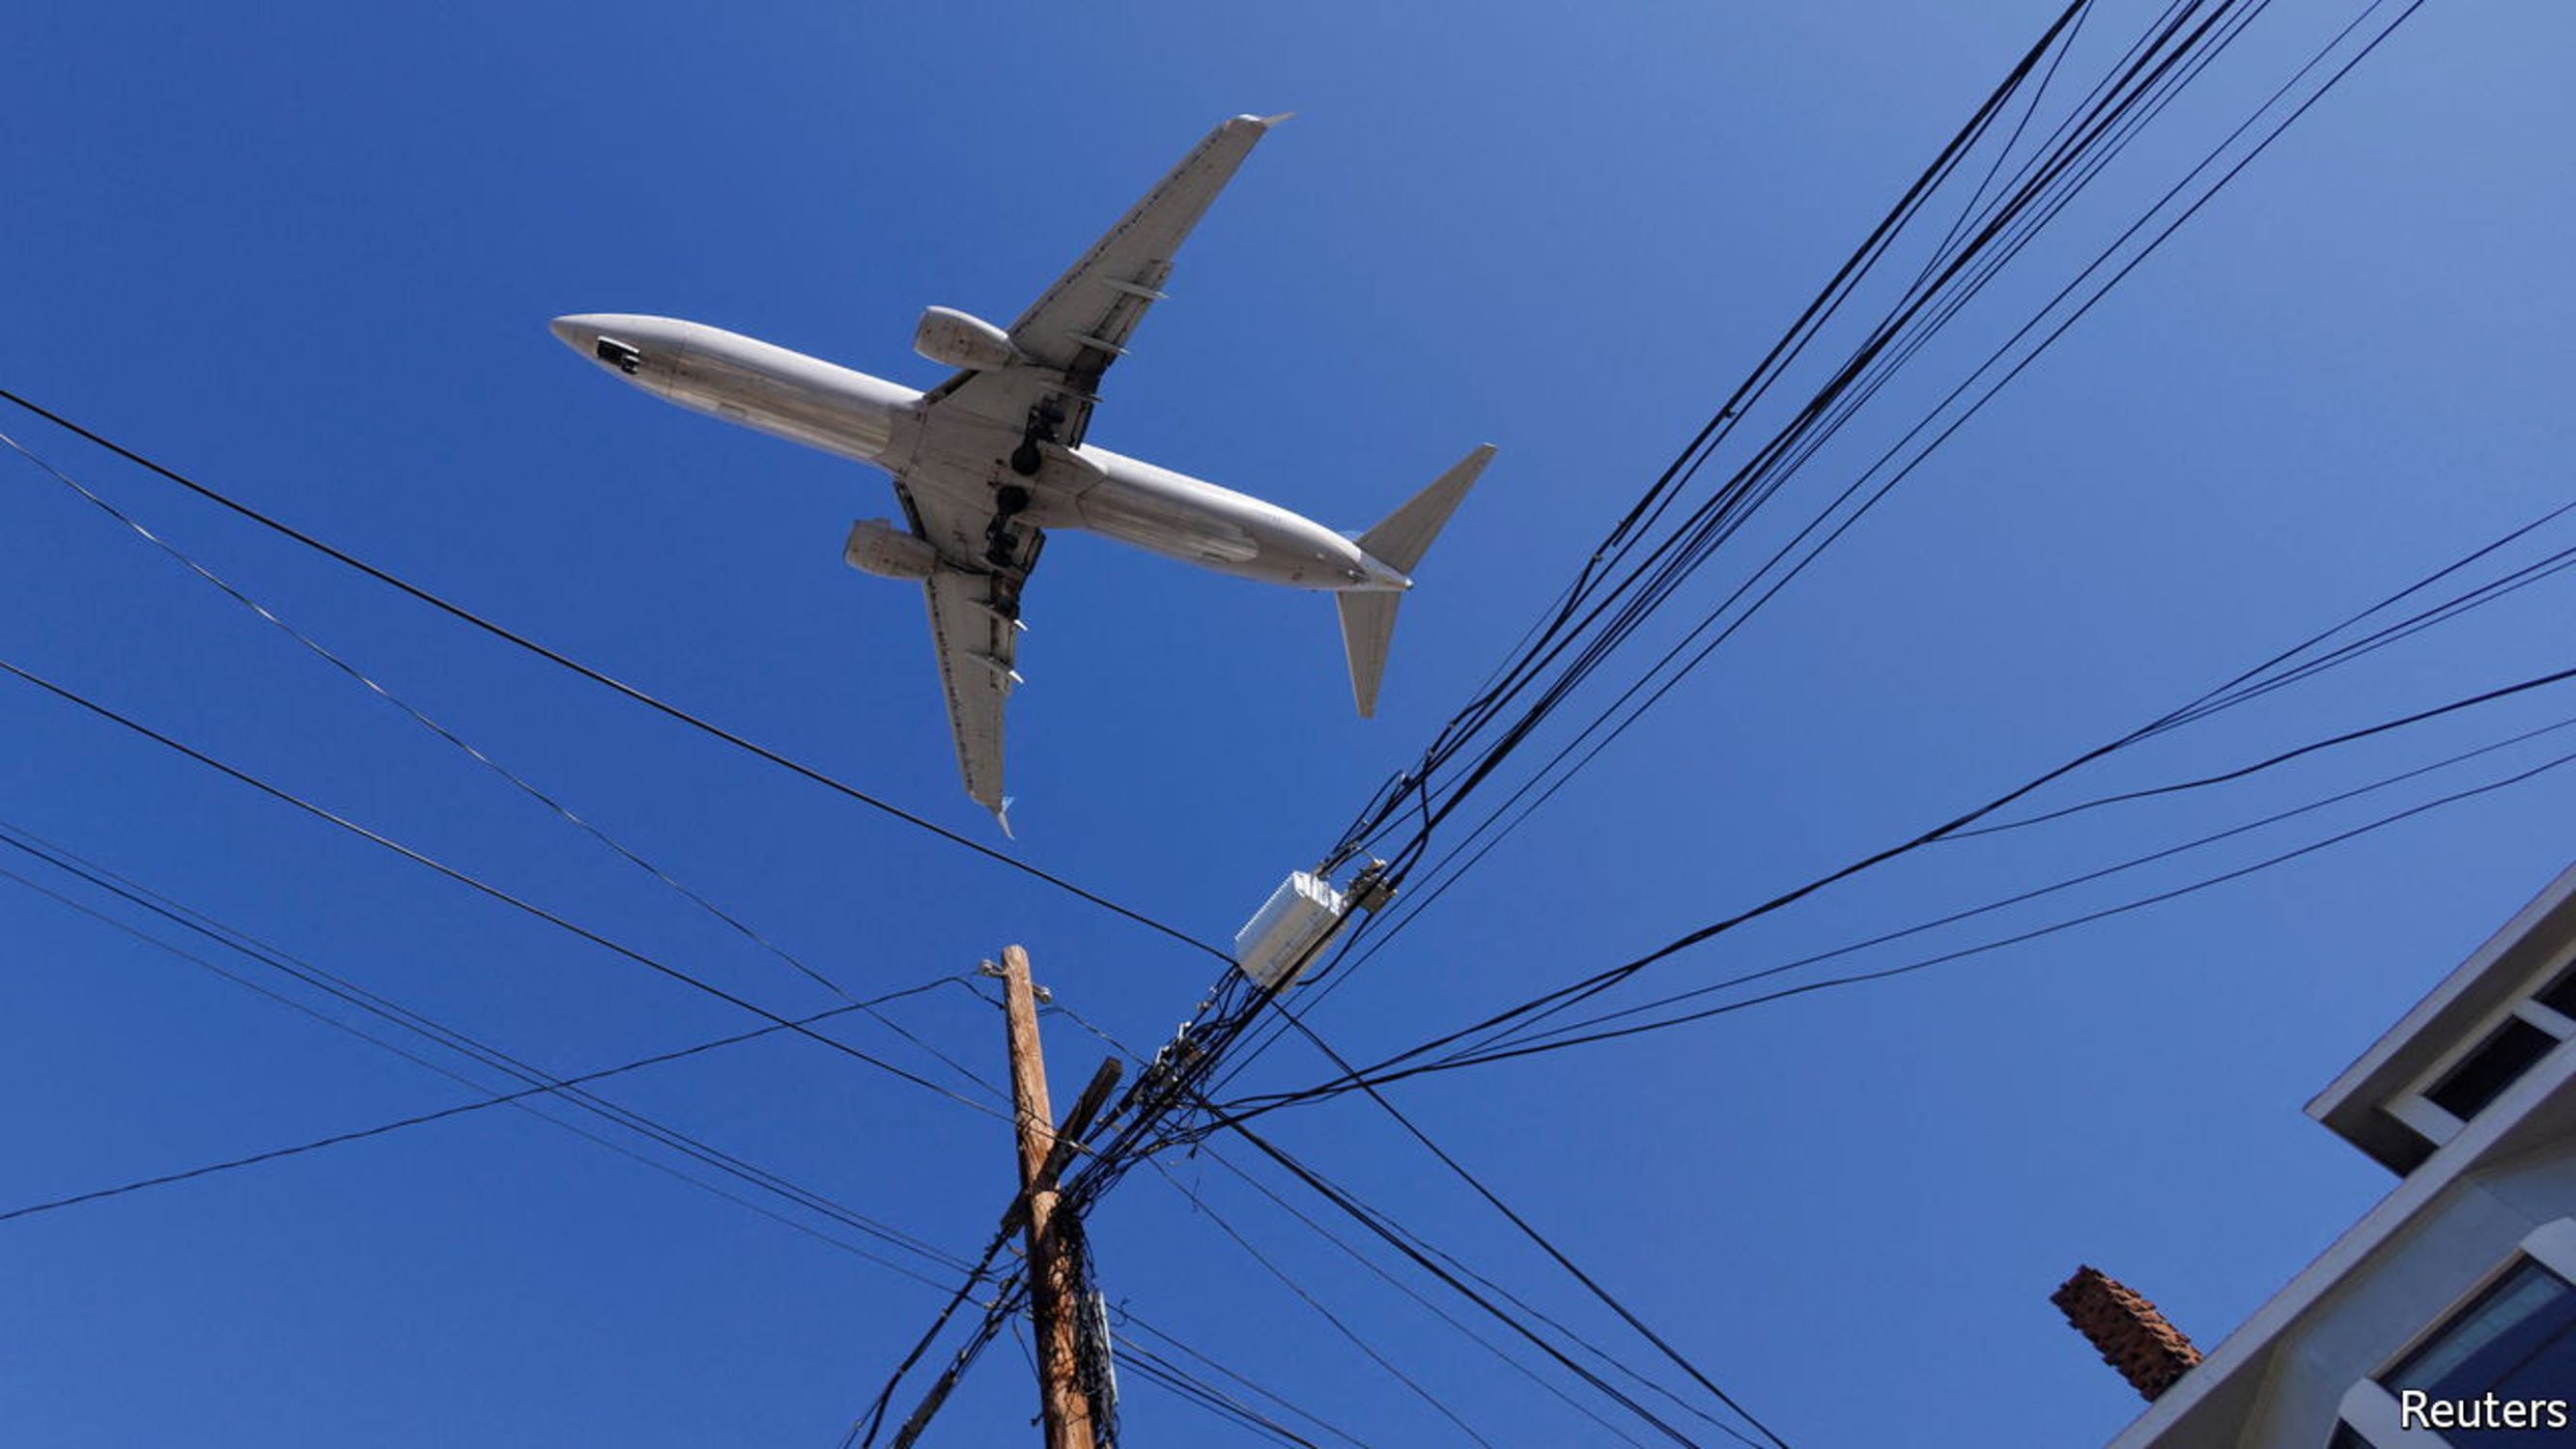 Why Does 5G Affect Airlines